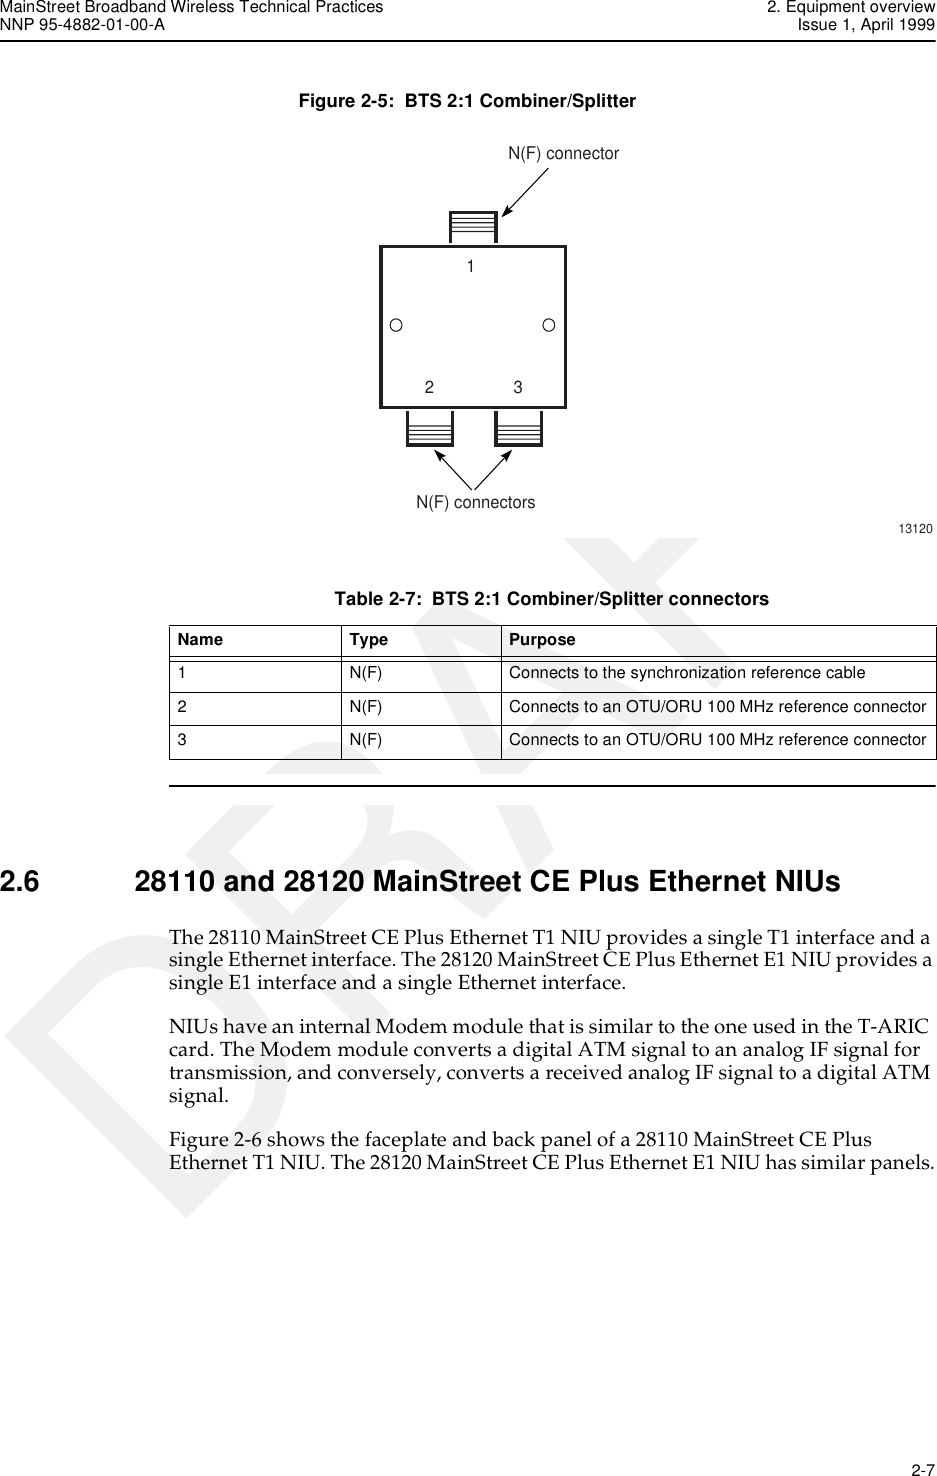 MainStreet Broadband Wireless Technical Practices 2. Equipment overviewNNP 95-4882-01-00-A Issue 1, April 1999   2-7DRAFTFigure 2-5:  BTS 2:1 Combiner/SplitterTable 2-7:  BTS 2:1 Combiner/Splitter connectors2.6 28110 and 28120 MainStreet CE Plus Ethernet NIUsThe 28110 MainStreet CE Plus Ethernet T1 NIU provides a single T1 interface and a single Ethernet interface. The 28120 MainStreet CE Plus Ethernet E1 NIU provides a single E1 interface and a single Ethernet interface.NIUs have an internal Modem module that is similar to the one used in the T-ARIC card. The Modem module converts a digital ATM signal to an analog IF signal for transmission, and conversely, converts a received analog IF signal to a digital ATM signal.Figure 2-6 shows the faceplate and back panel of a 28110 MainStreet CE Plus Ethernet T1 NIU. The 28120 MainStreet CE Plus Ethernet E1 NIU has similar panels.13120N(F) connectorN(F) connectors123Name Type Purpose1 N(F) Connects to the synchronization reference cable2 N(F) Connects to an OTU/ORU 100 MHz reference connector3 N(F) Connects to an OTU/ORU 100 MHz reference connector